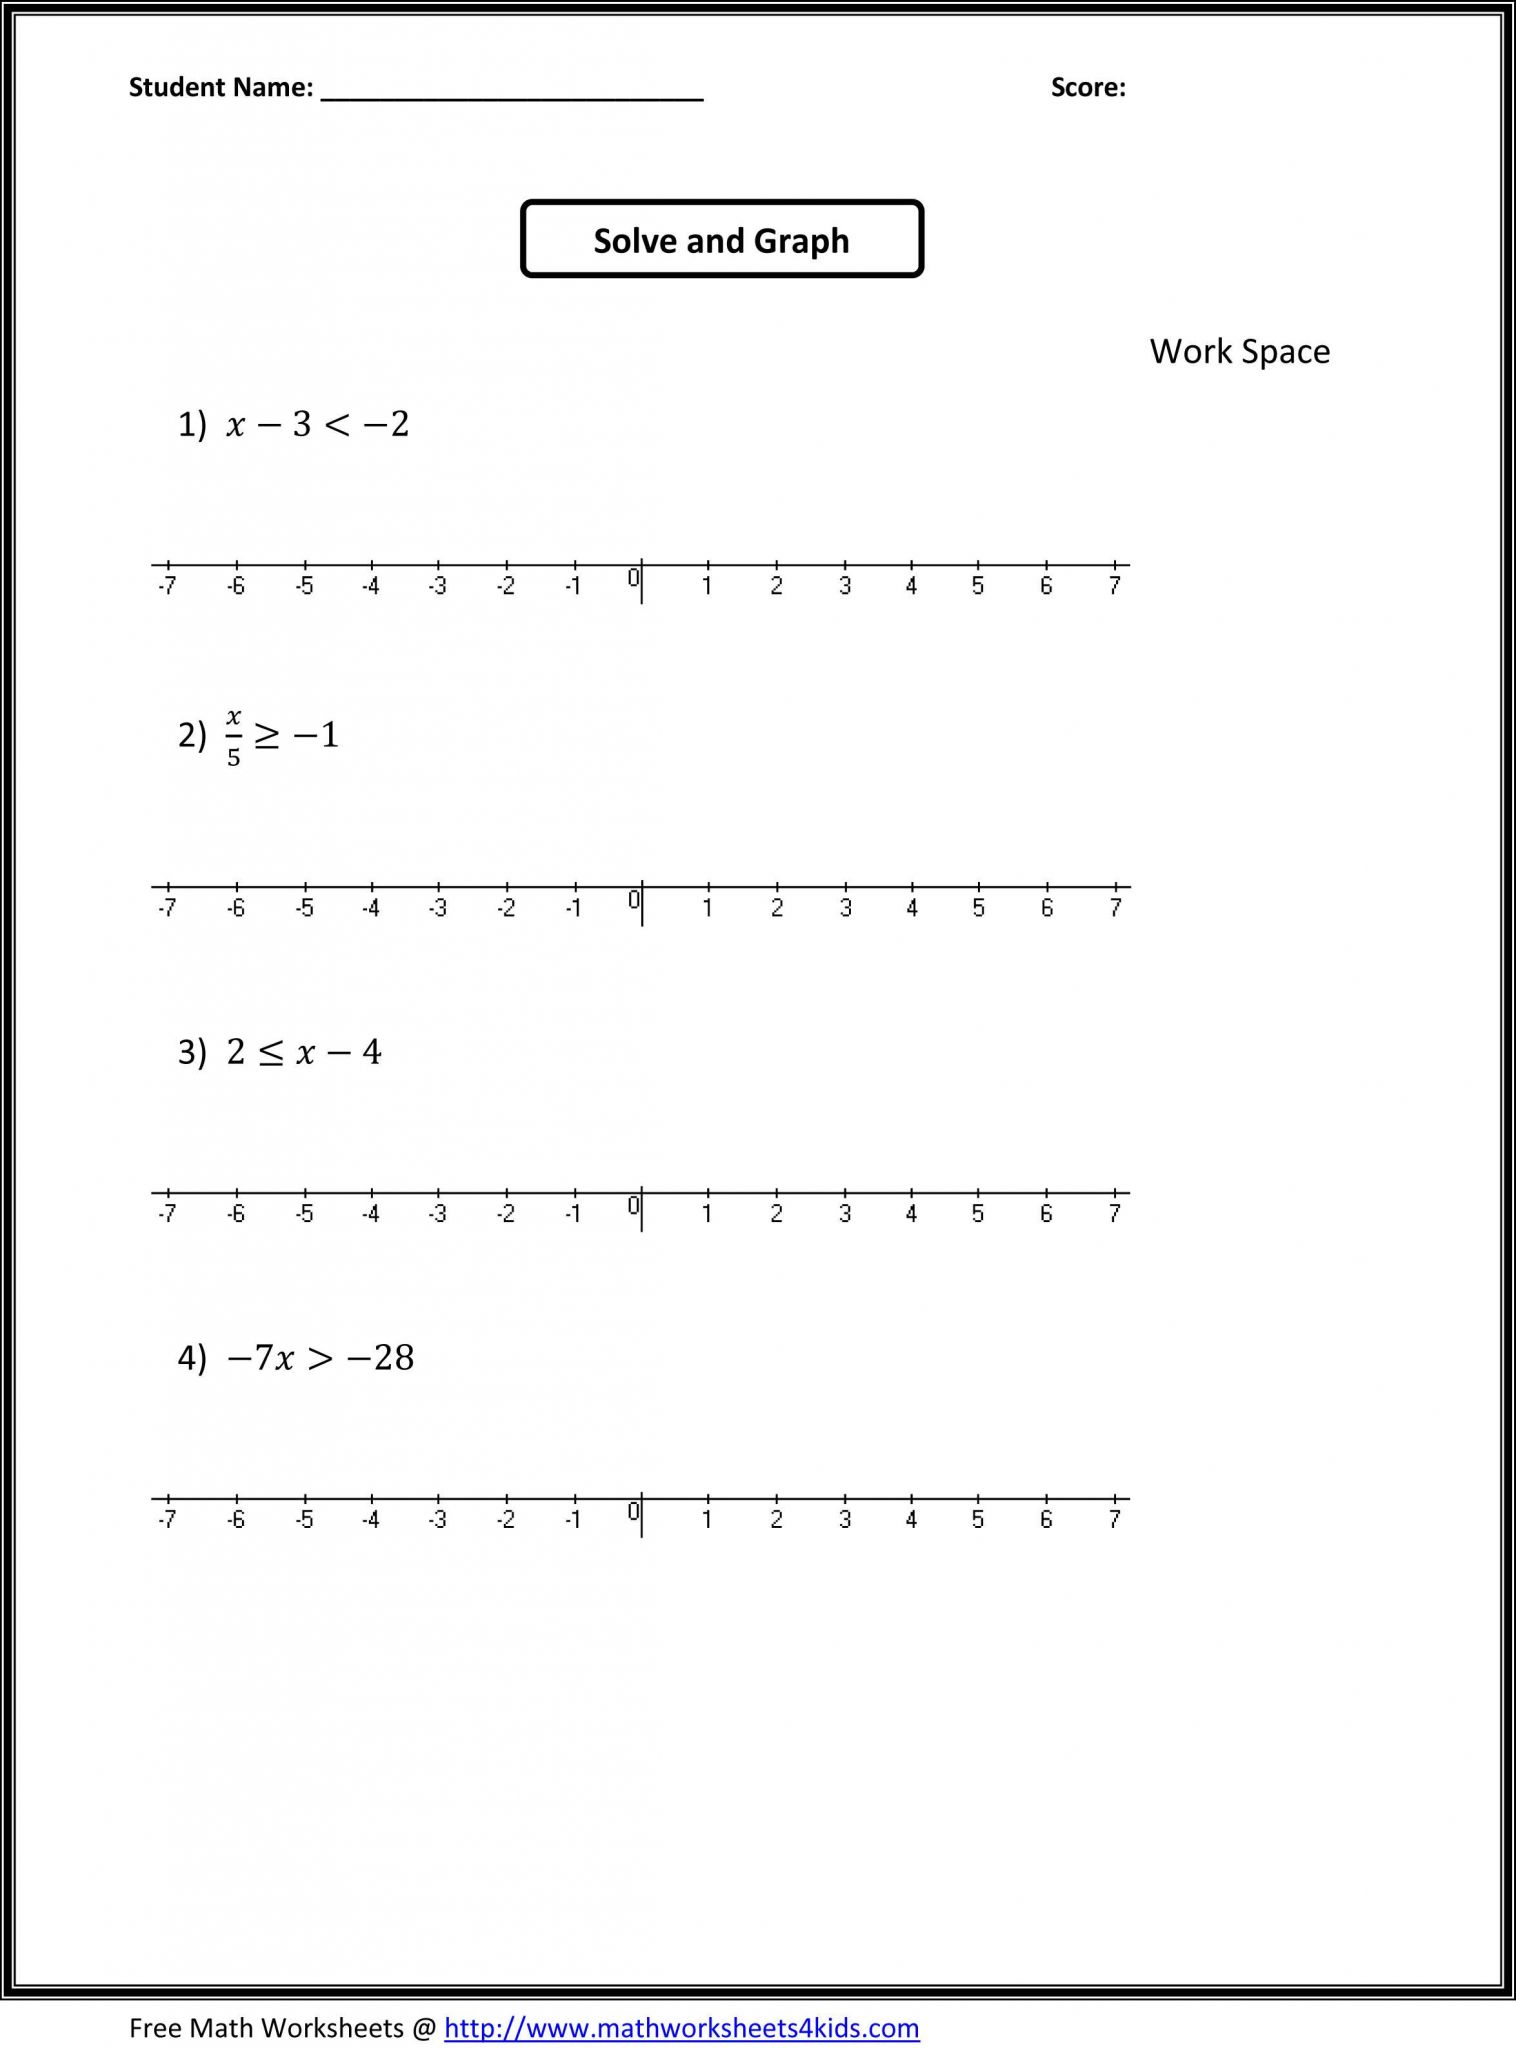 Compound Inequalities Worksheet Answers together with Pound Inequalities Worksheet with Answers Image Collections